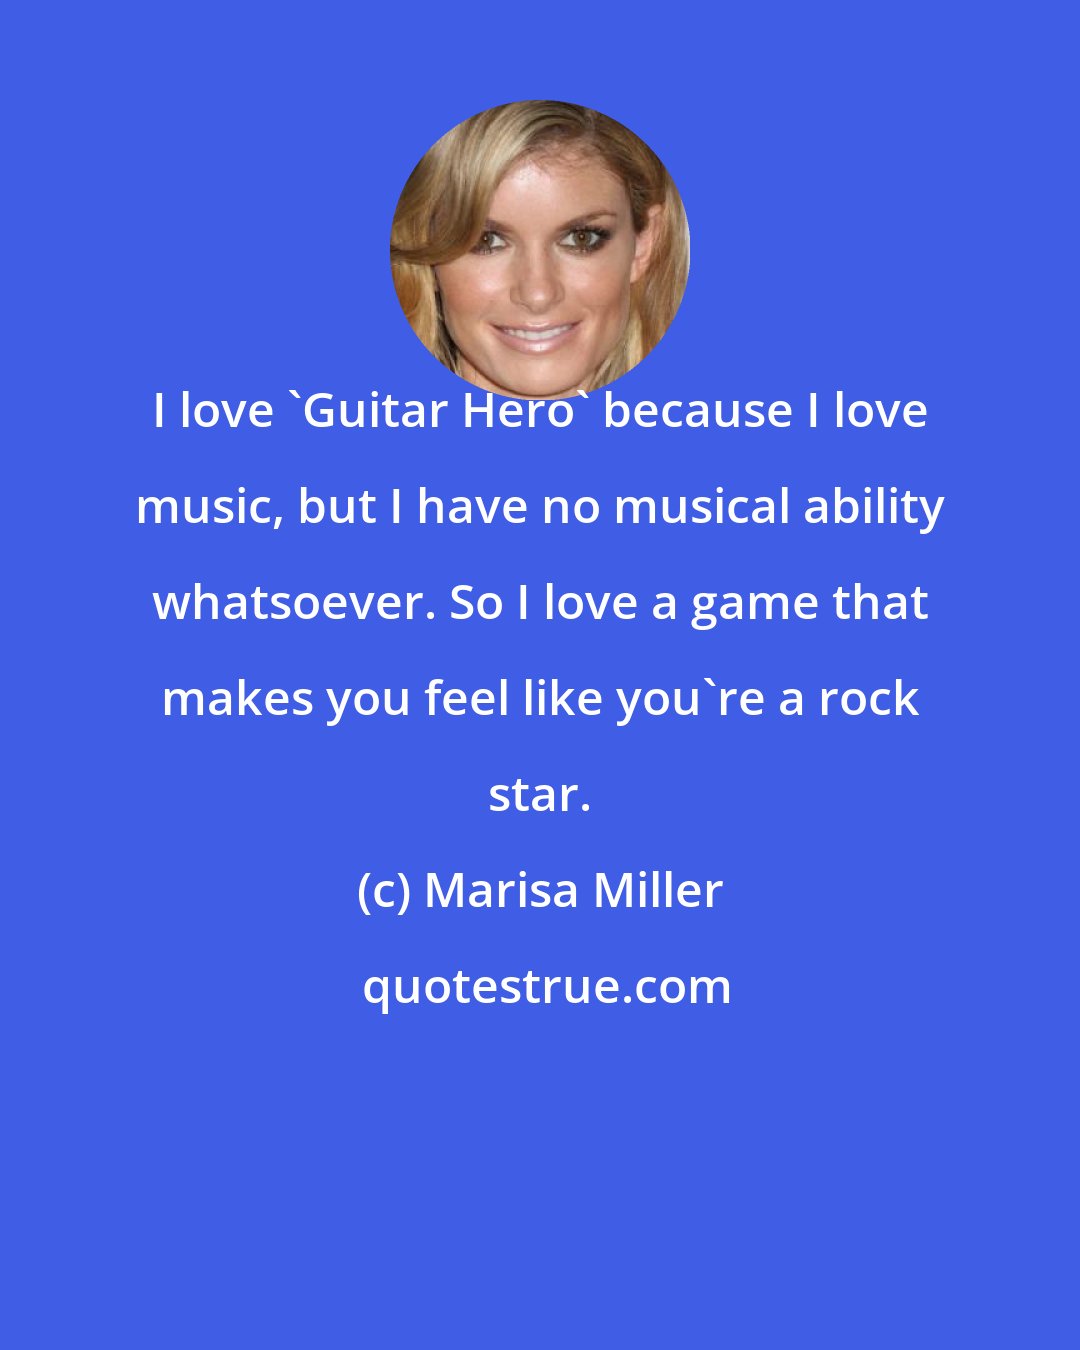 Marisa Miller: I love 'Guitar Hero' because I love music, but I have no musical ability whatsoever. So I love a game that makes you feel like you're a rock star.